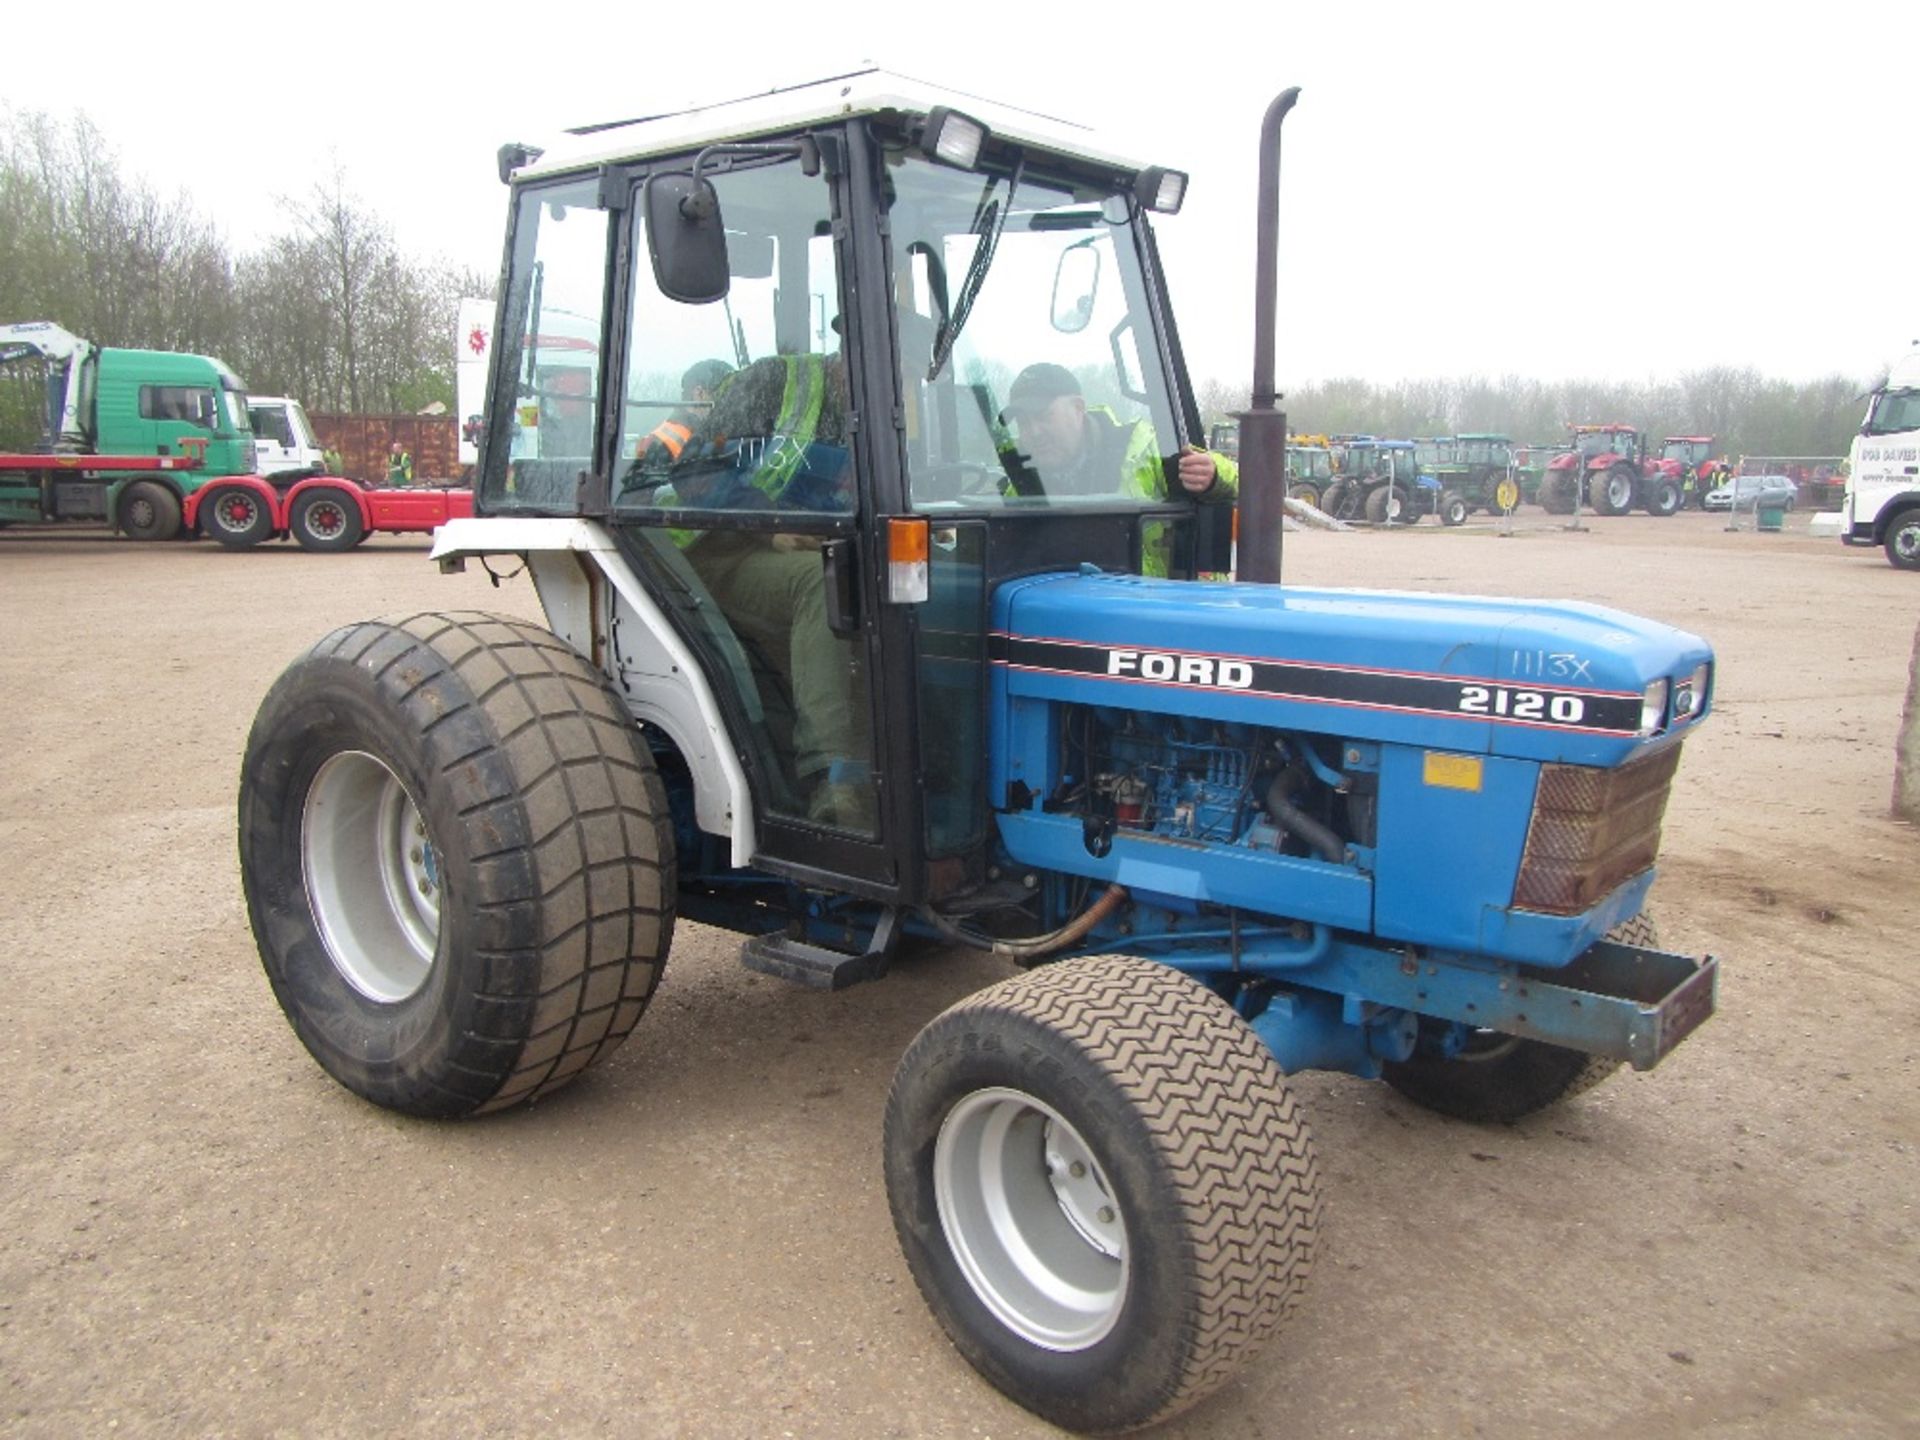 Ford 2120 Tractor c/w Turf Tyres - Image 2 of 3